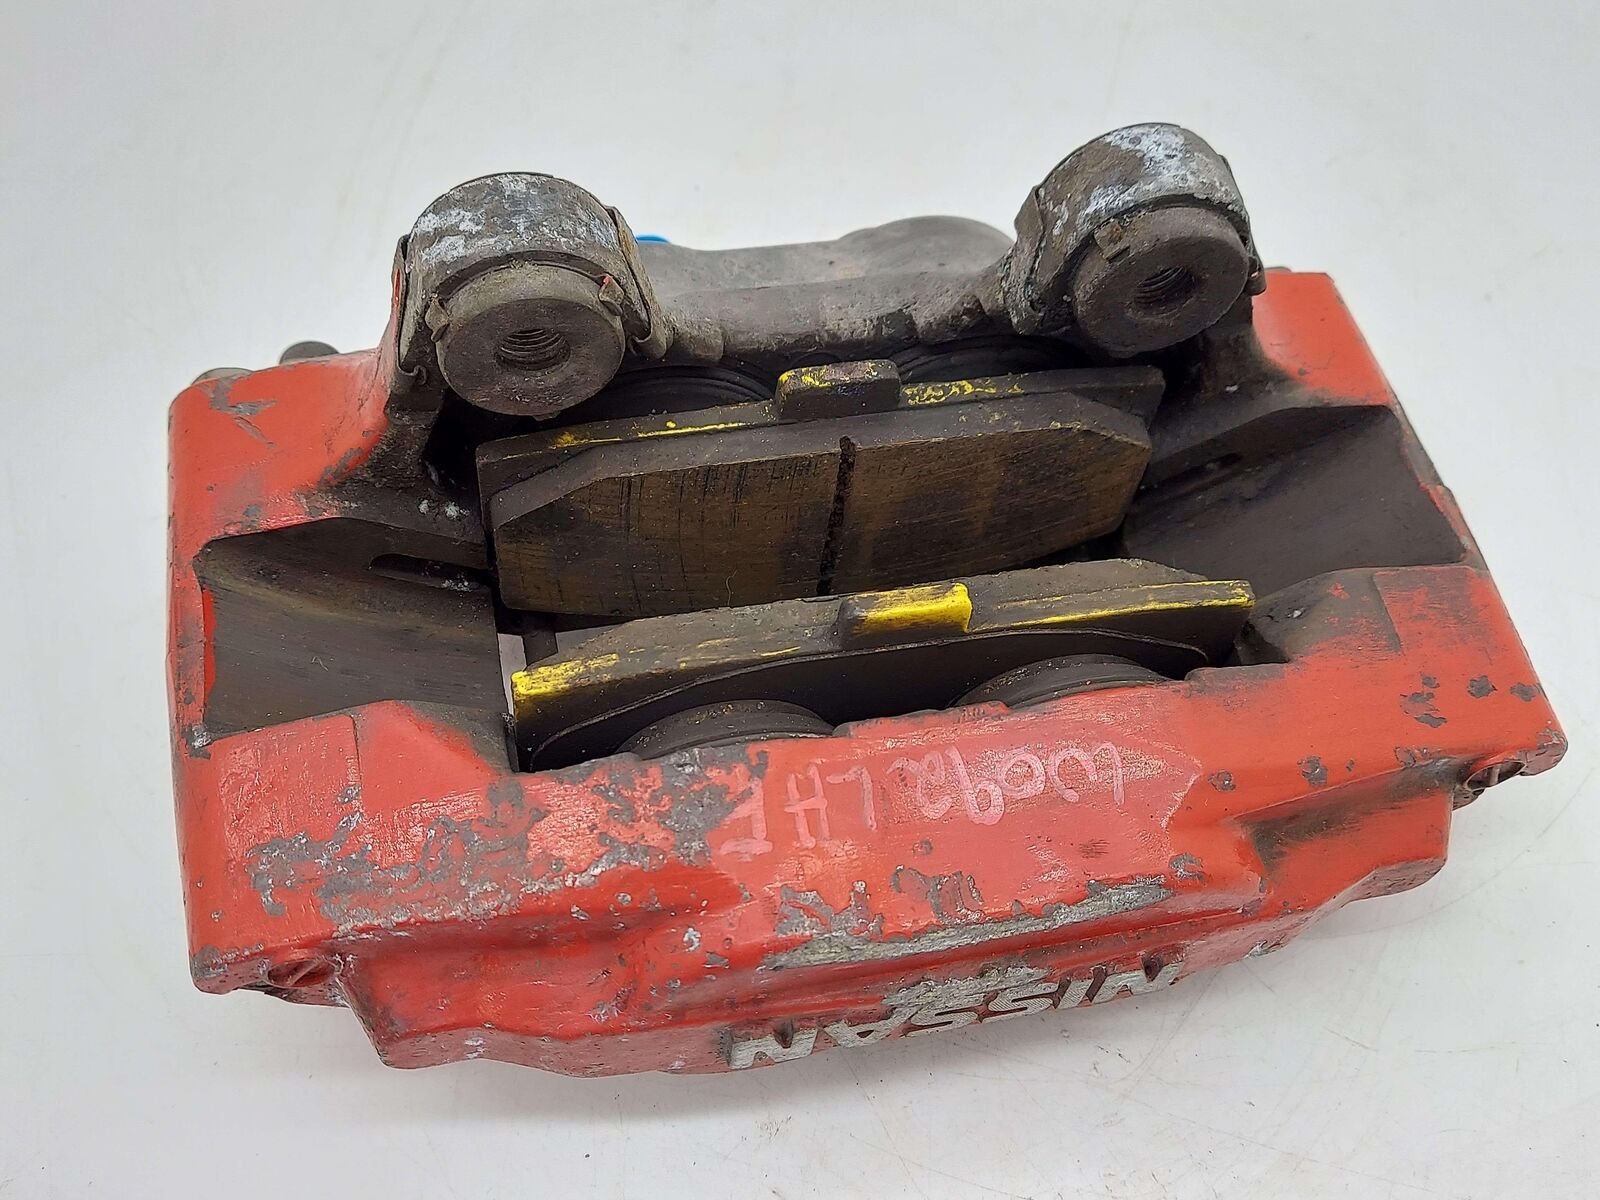 1991 Nissan Skyline R32 HCR32 GTS-T Coupe Front Left Caliper Red *Paint Damage